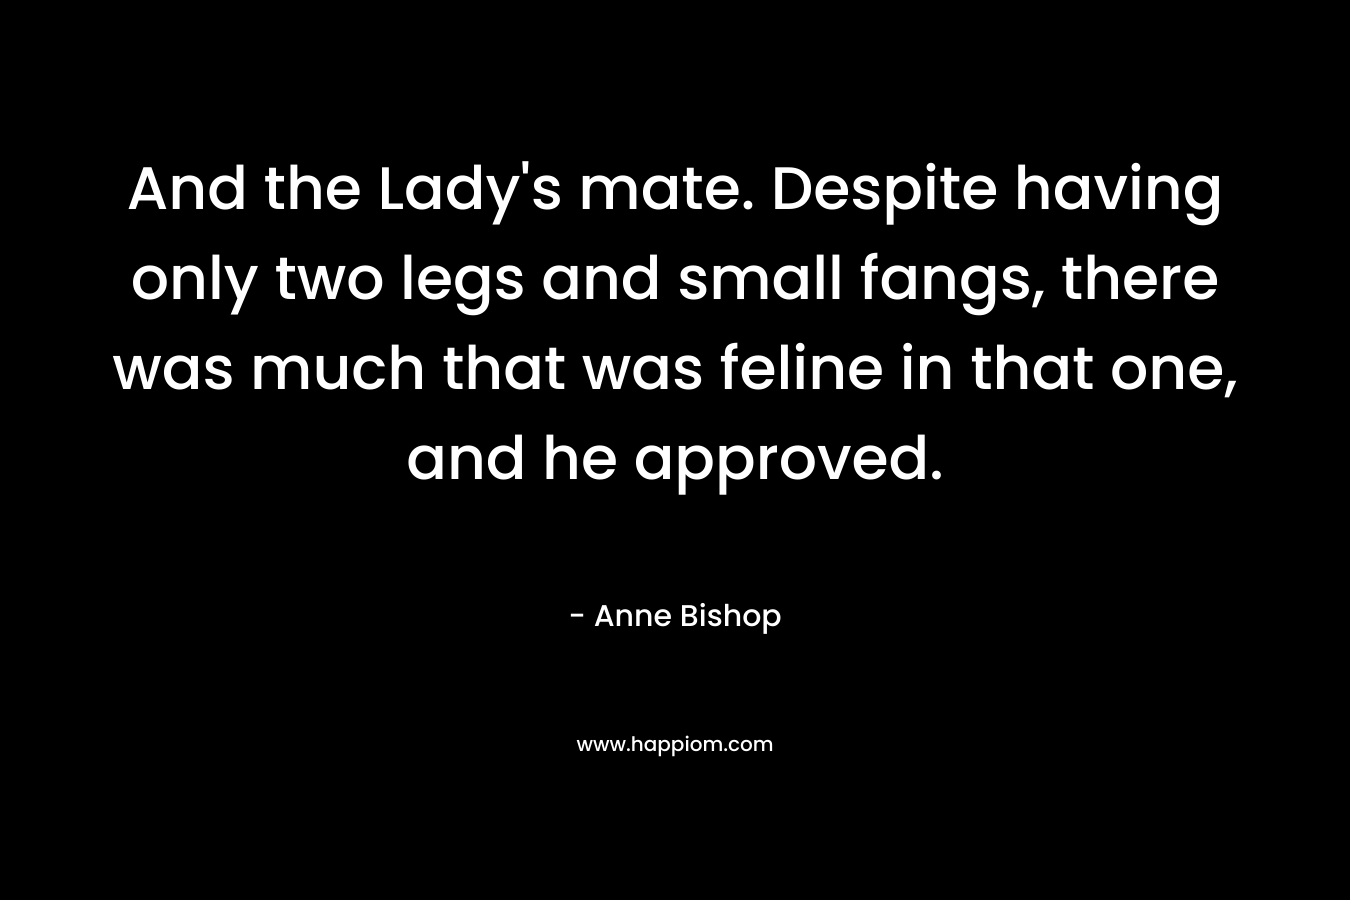 And the Lady’s mate. Despite having only two legs and small fangs, there was much that was feline in that one, and he approved. – Anne Bishop